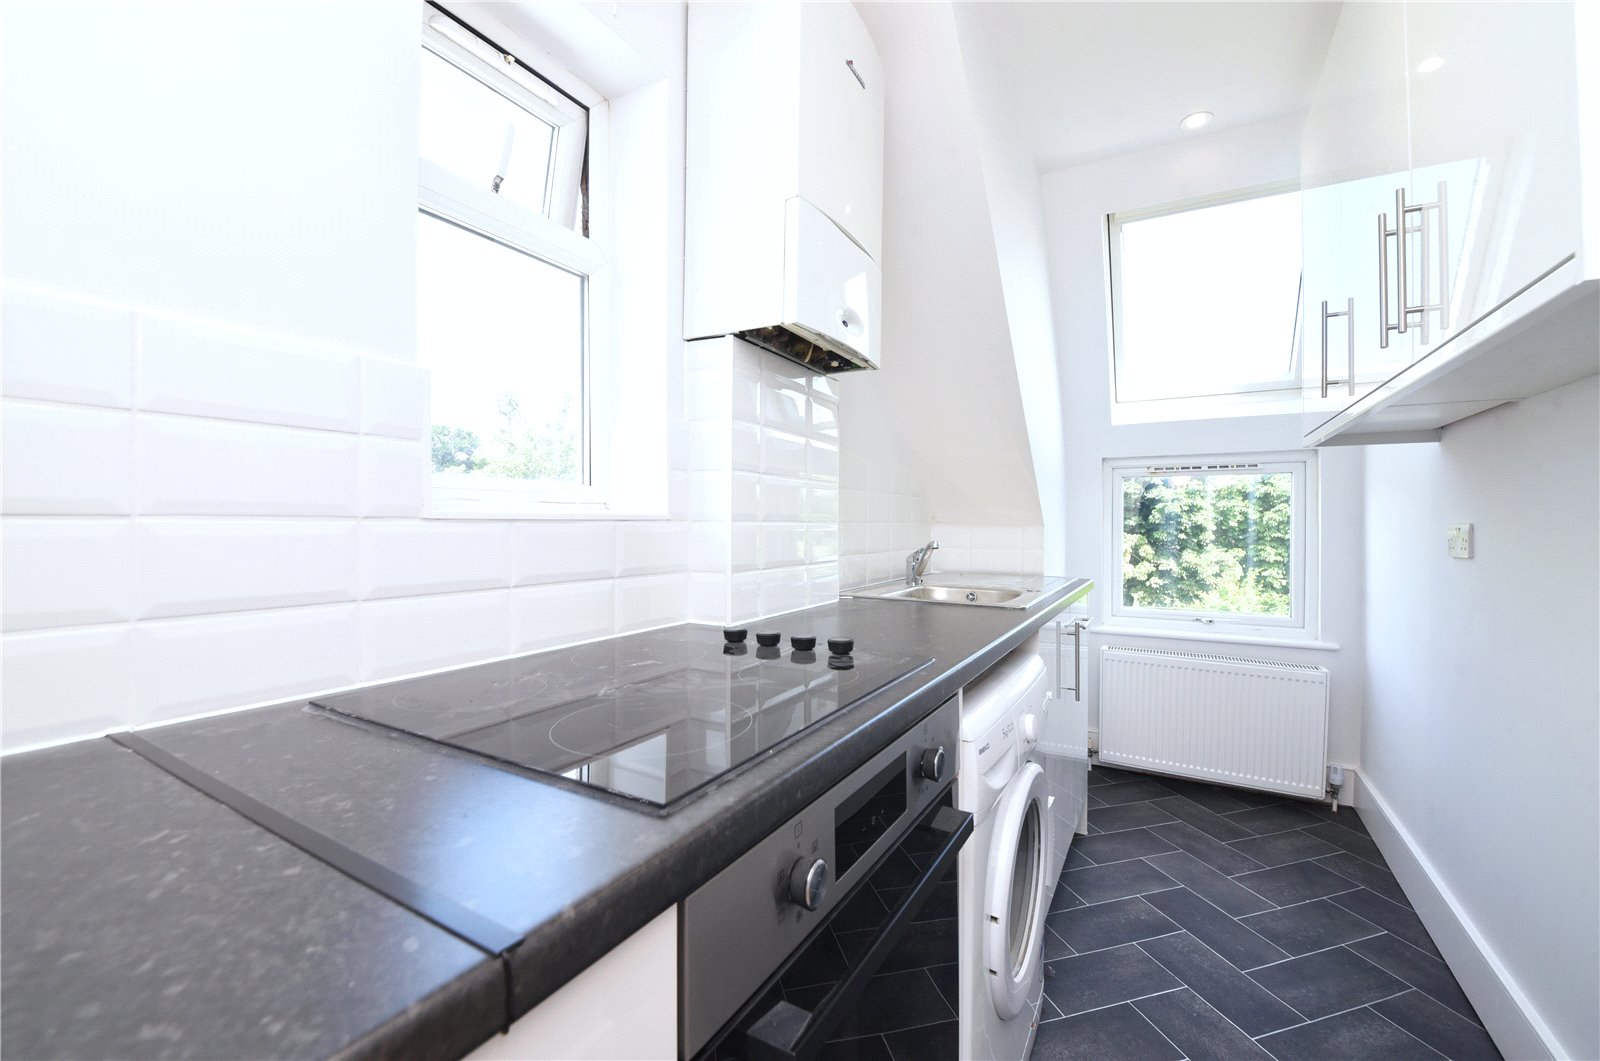 1 bed apartment to rent in Whitchurch Lane, Edgware - Property Image 1